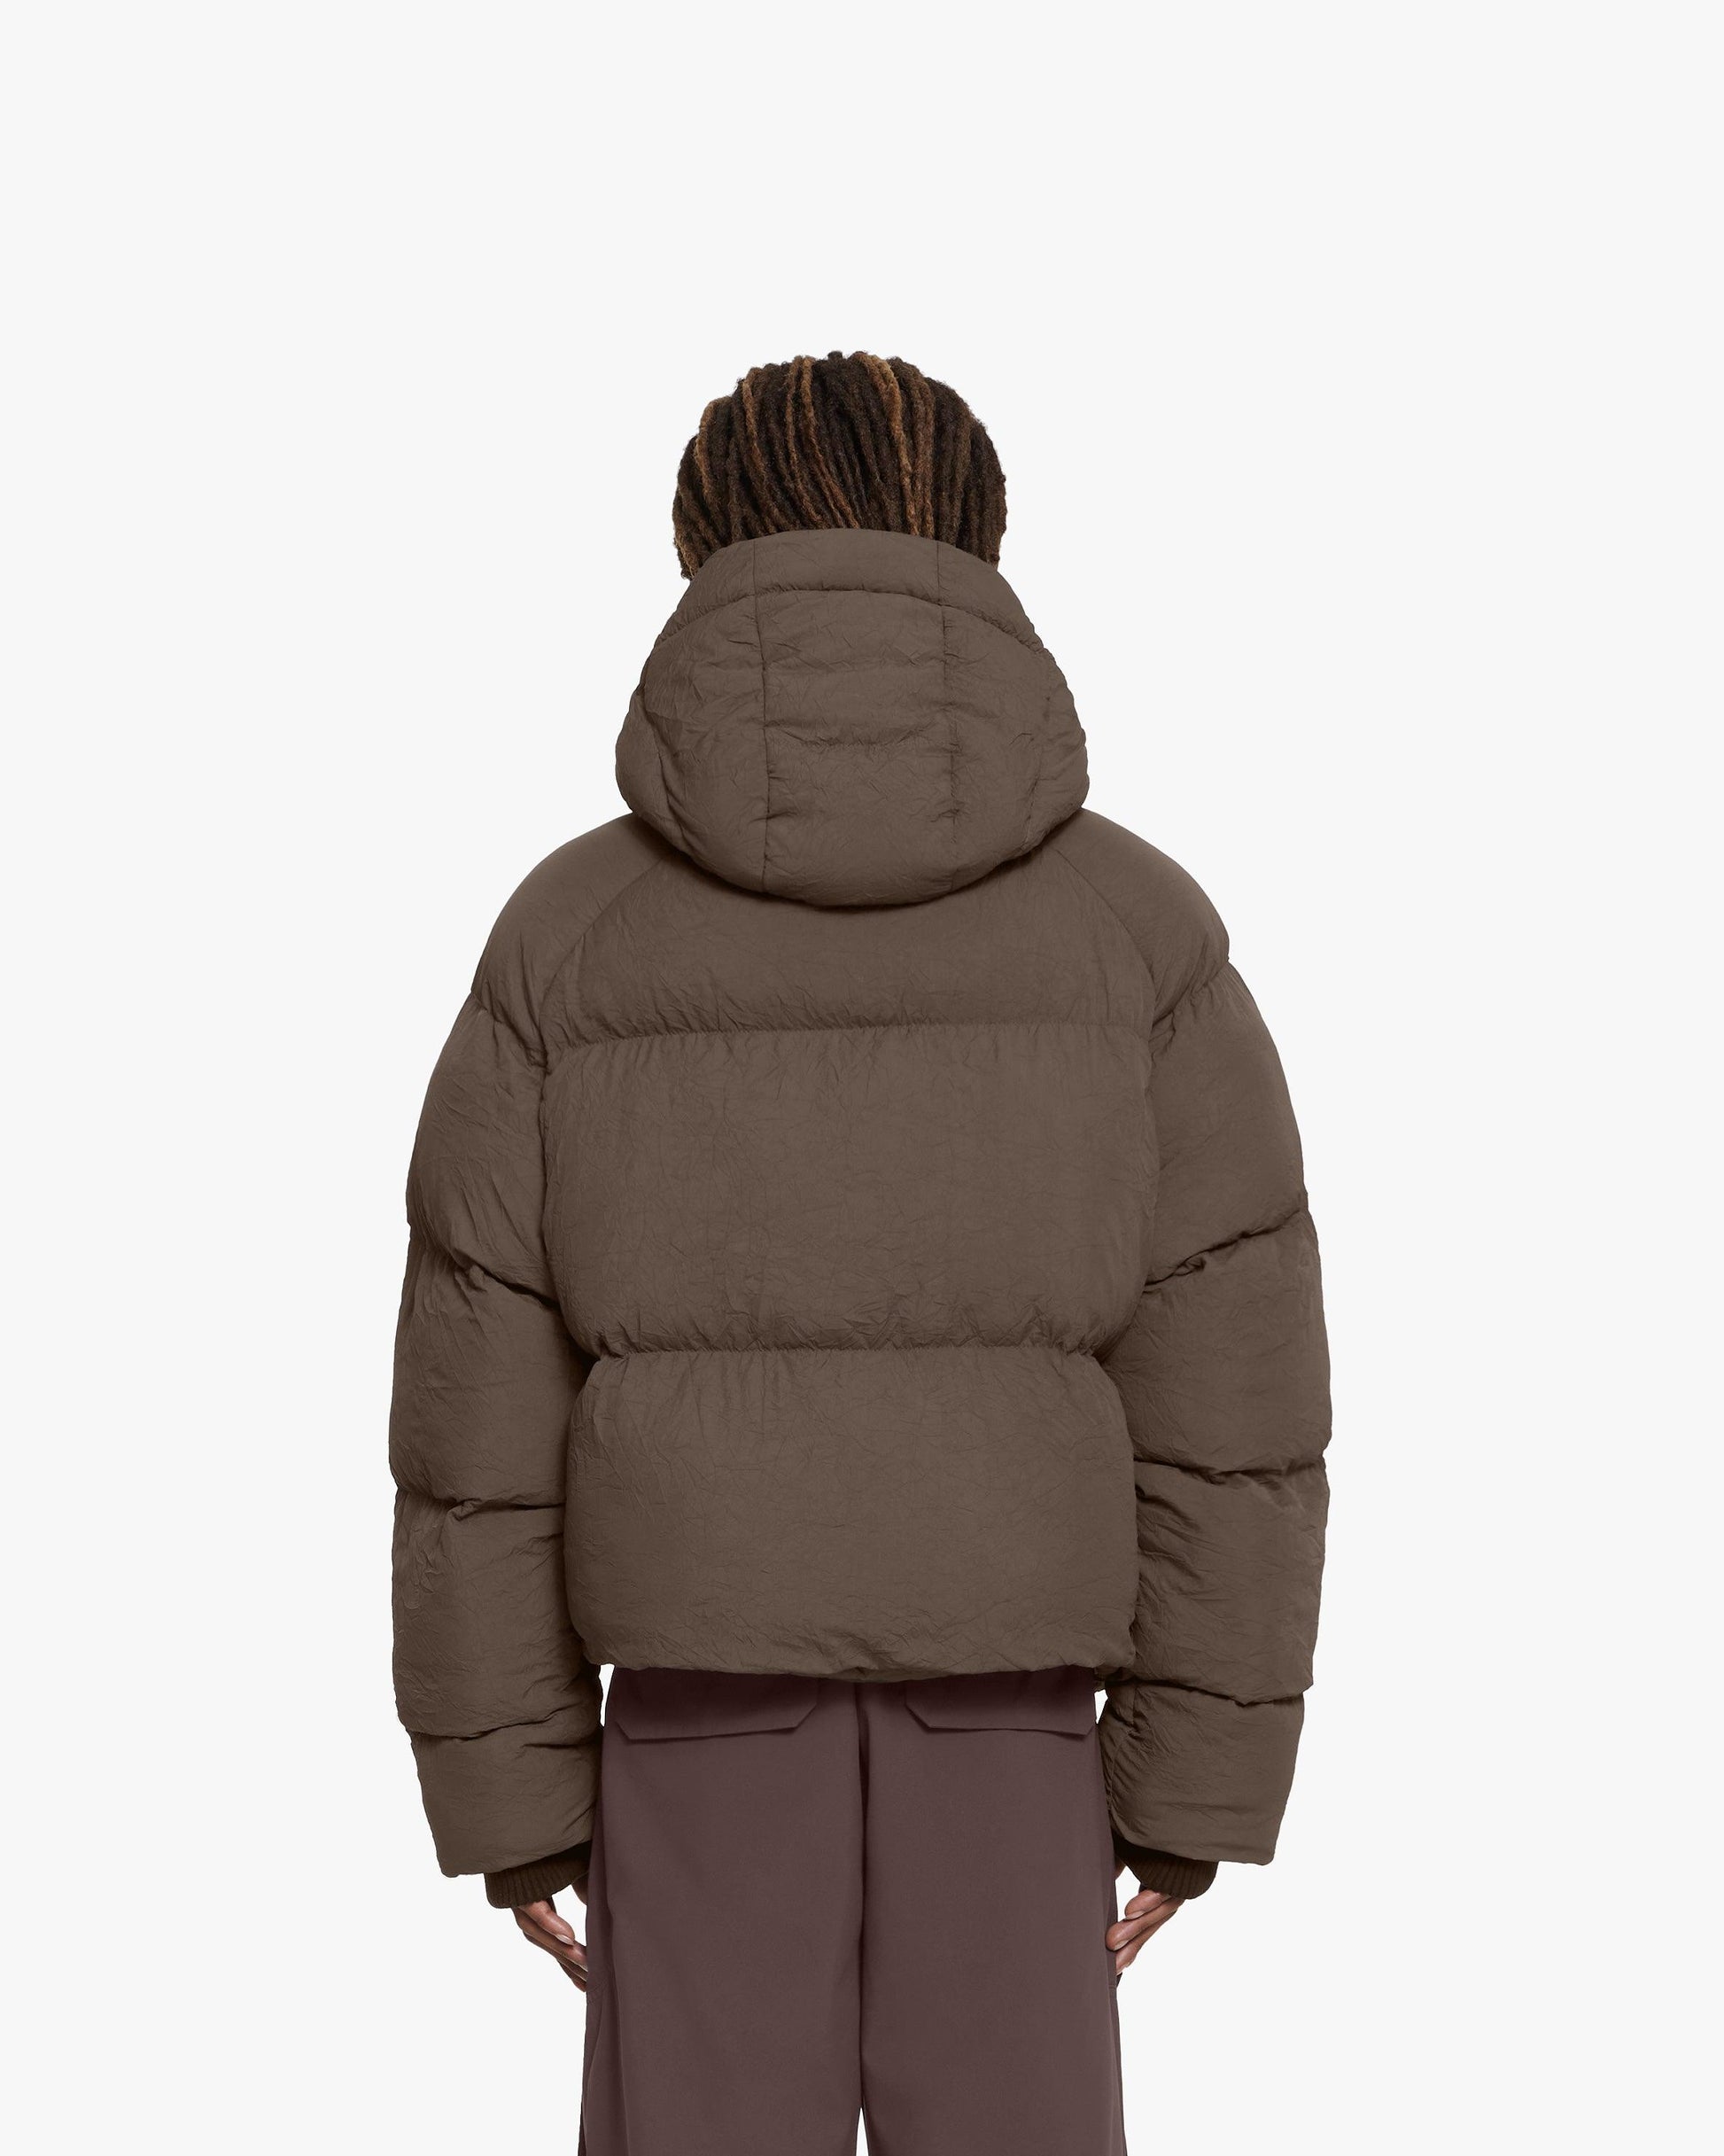 PUFFER JACKET BROWN - VICINITY